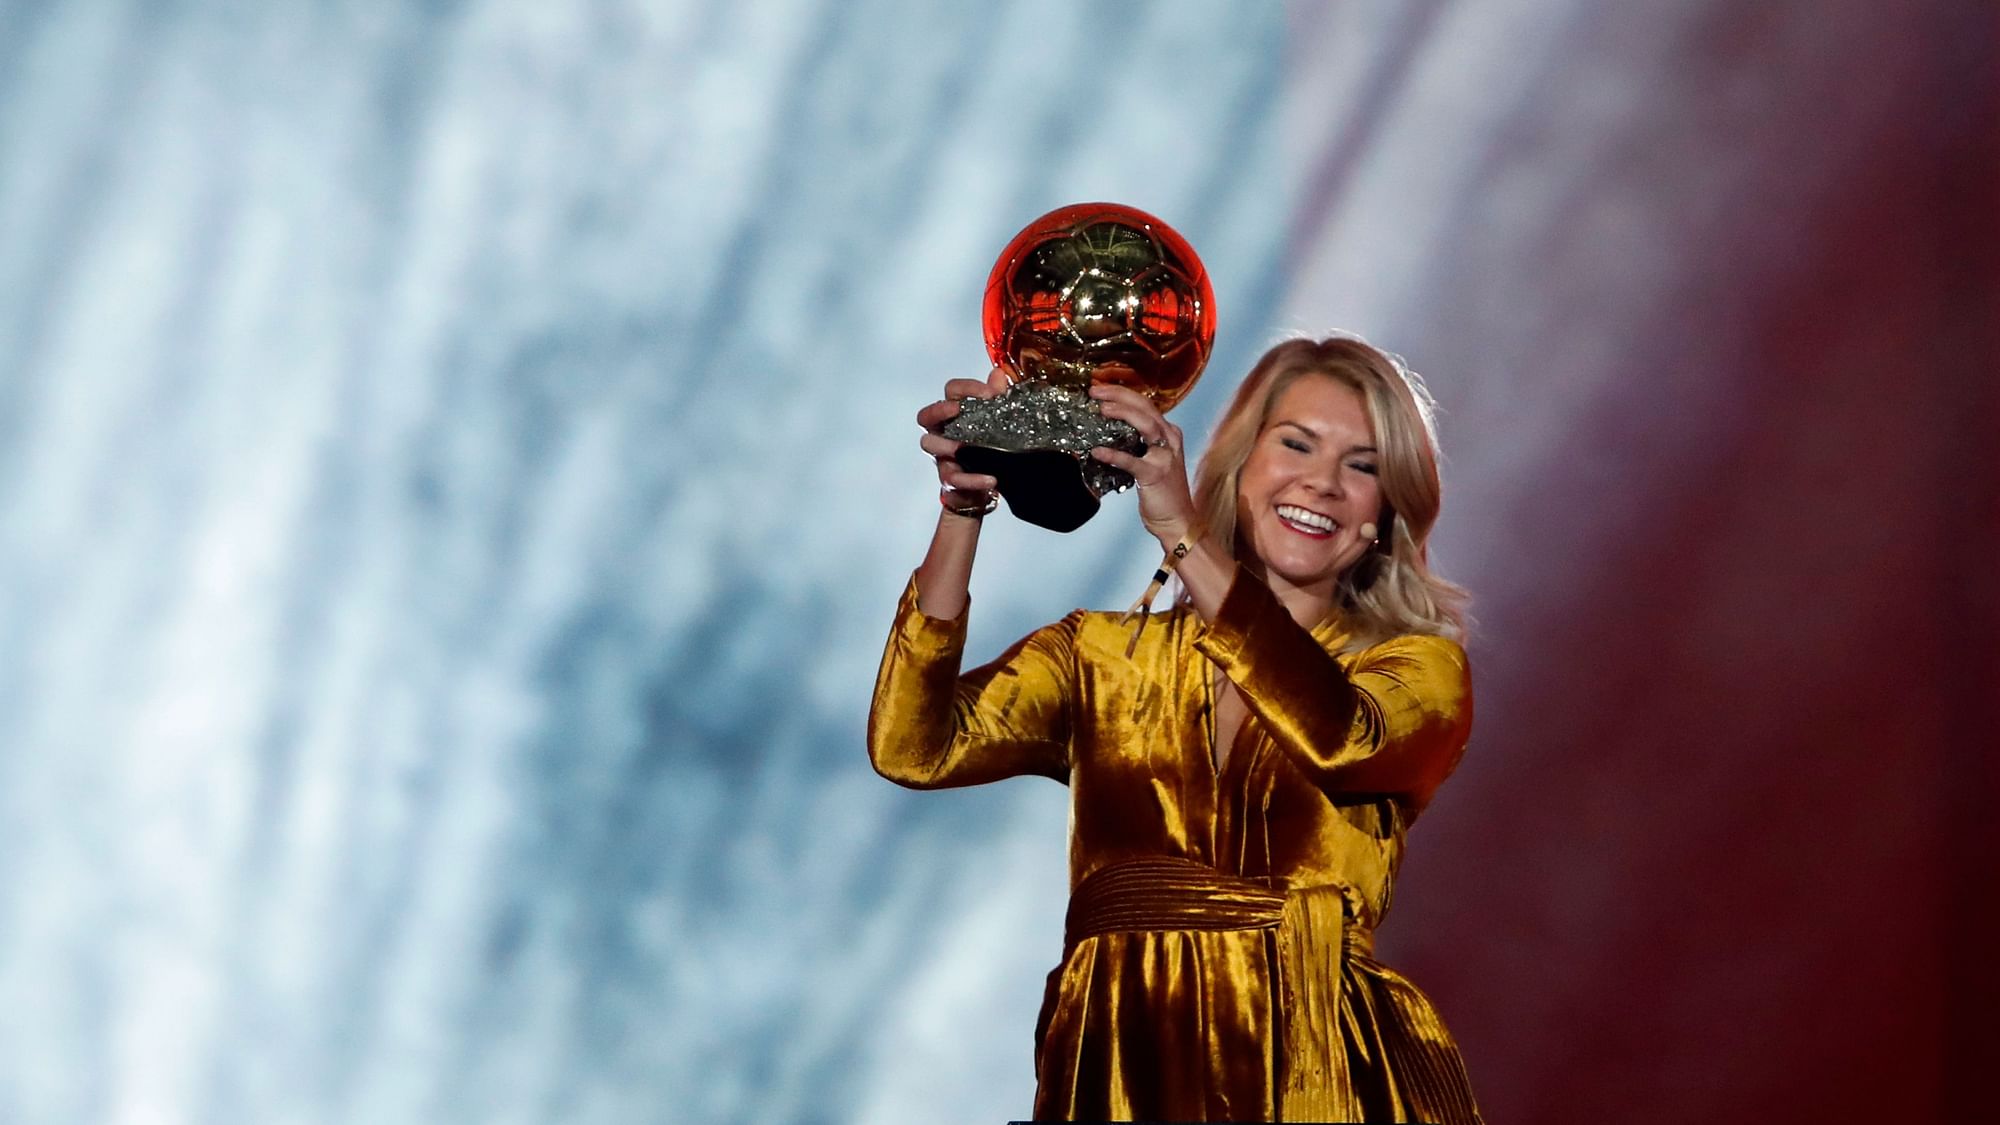 Norway’s Ada Hegerberg celebrates with the Women’s Ballon d’Or award during the Golden Ball award ceremony at the Grand Palais in Paris on Monday, December 3, 2018.